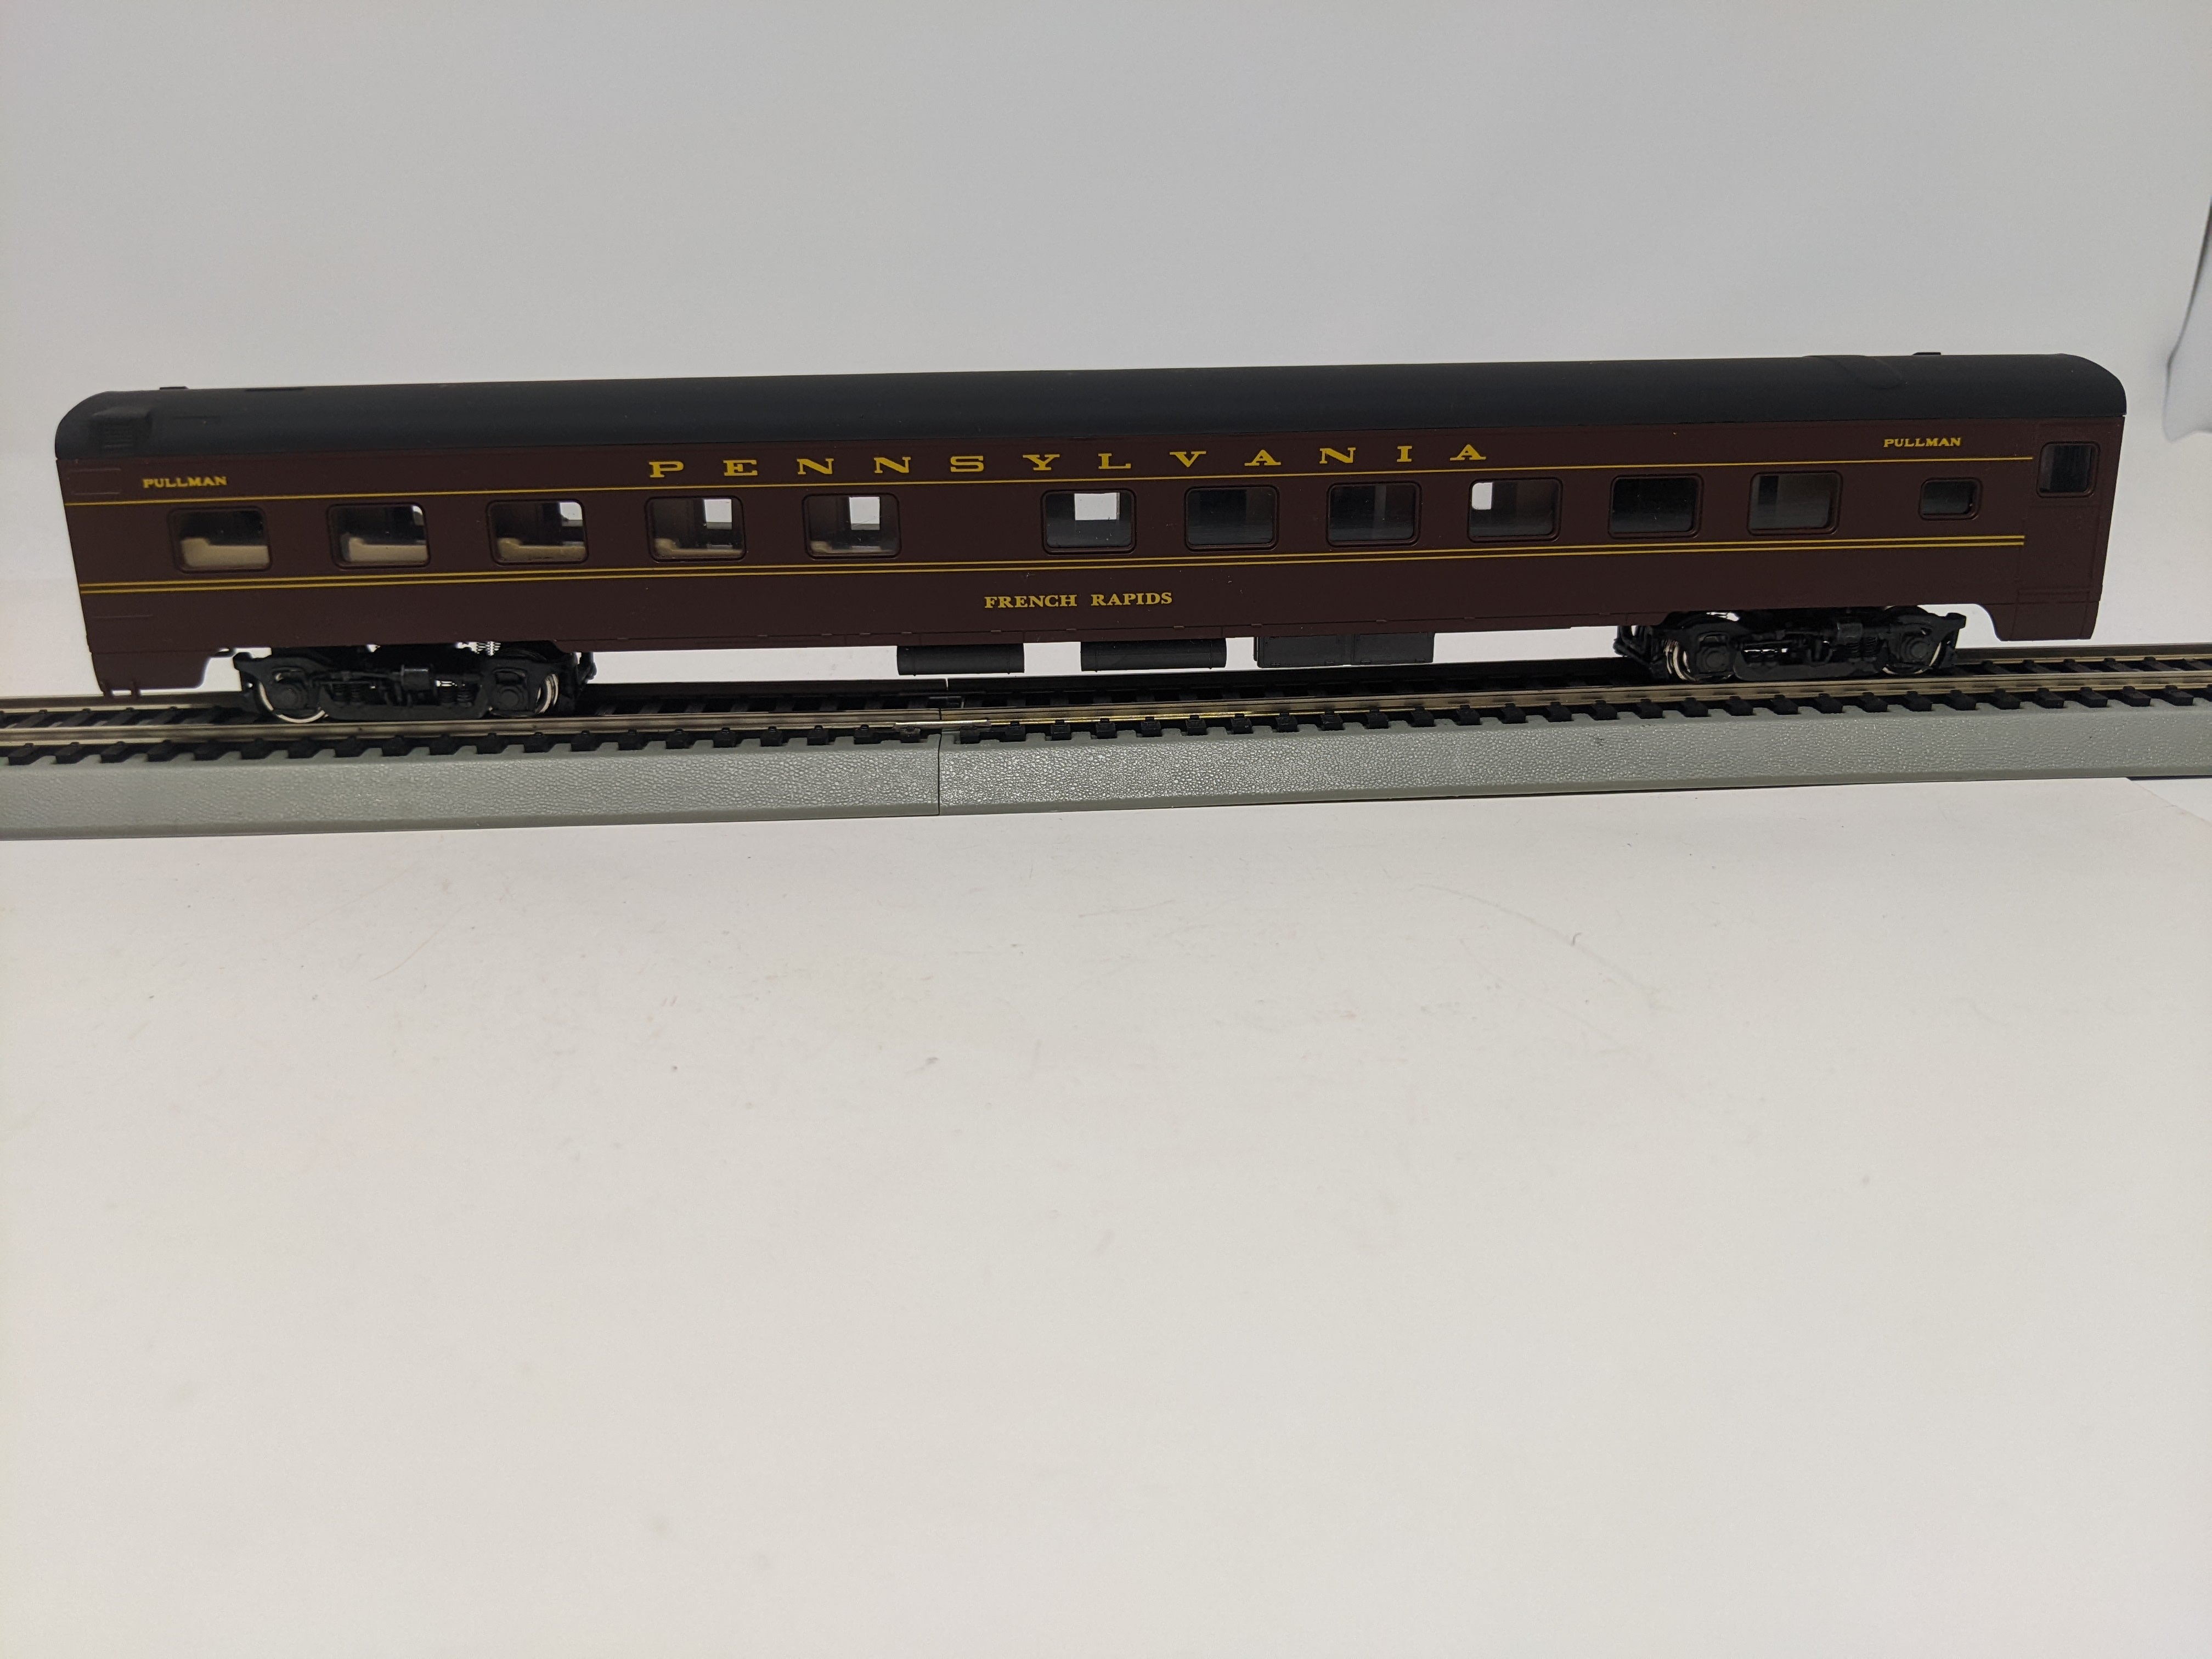 USED IHC 1722851 HO Scale, Smooth Side Roomette Passenger Car, Pennsylvania , French Rapids, Read Description